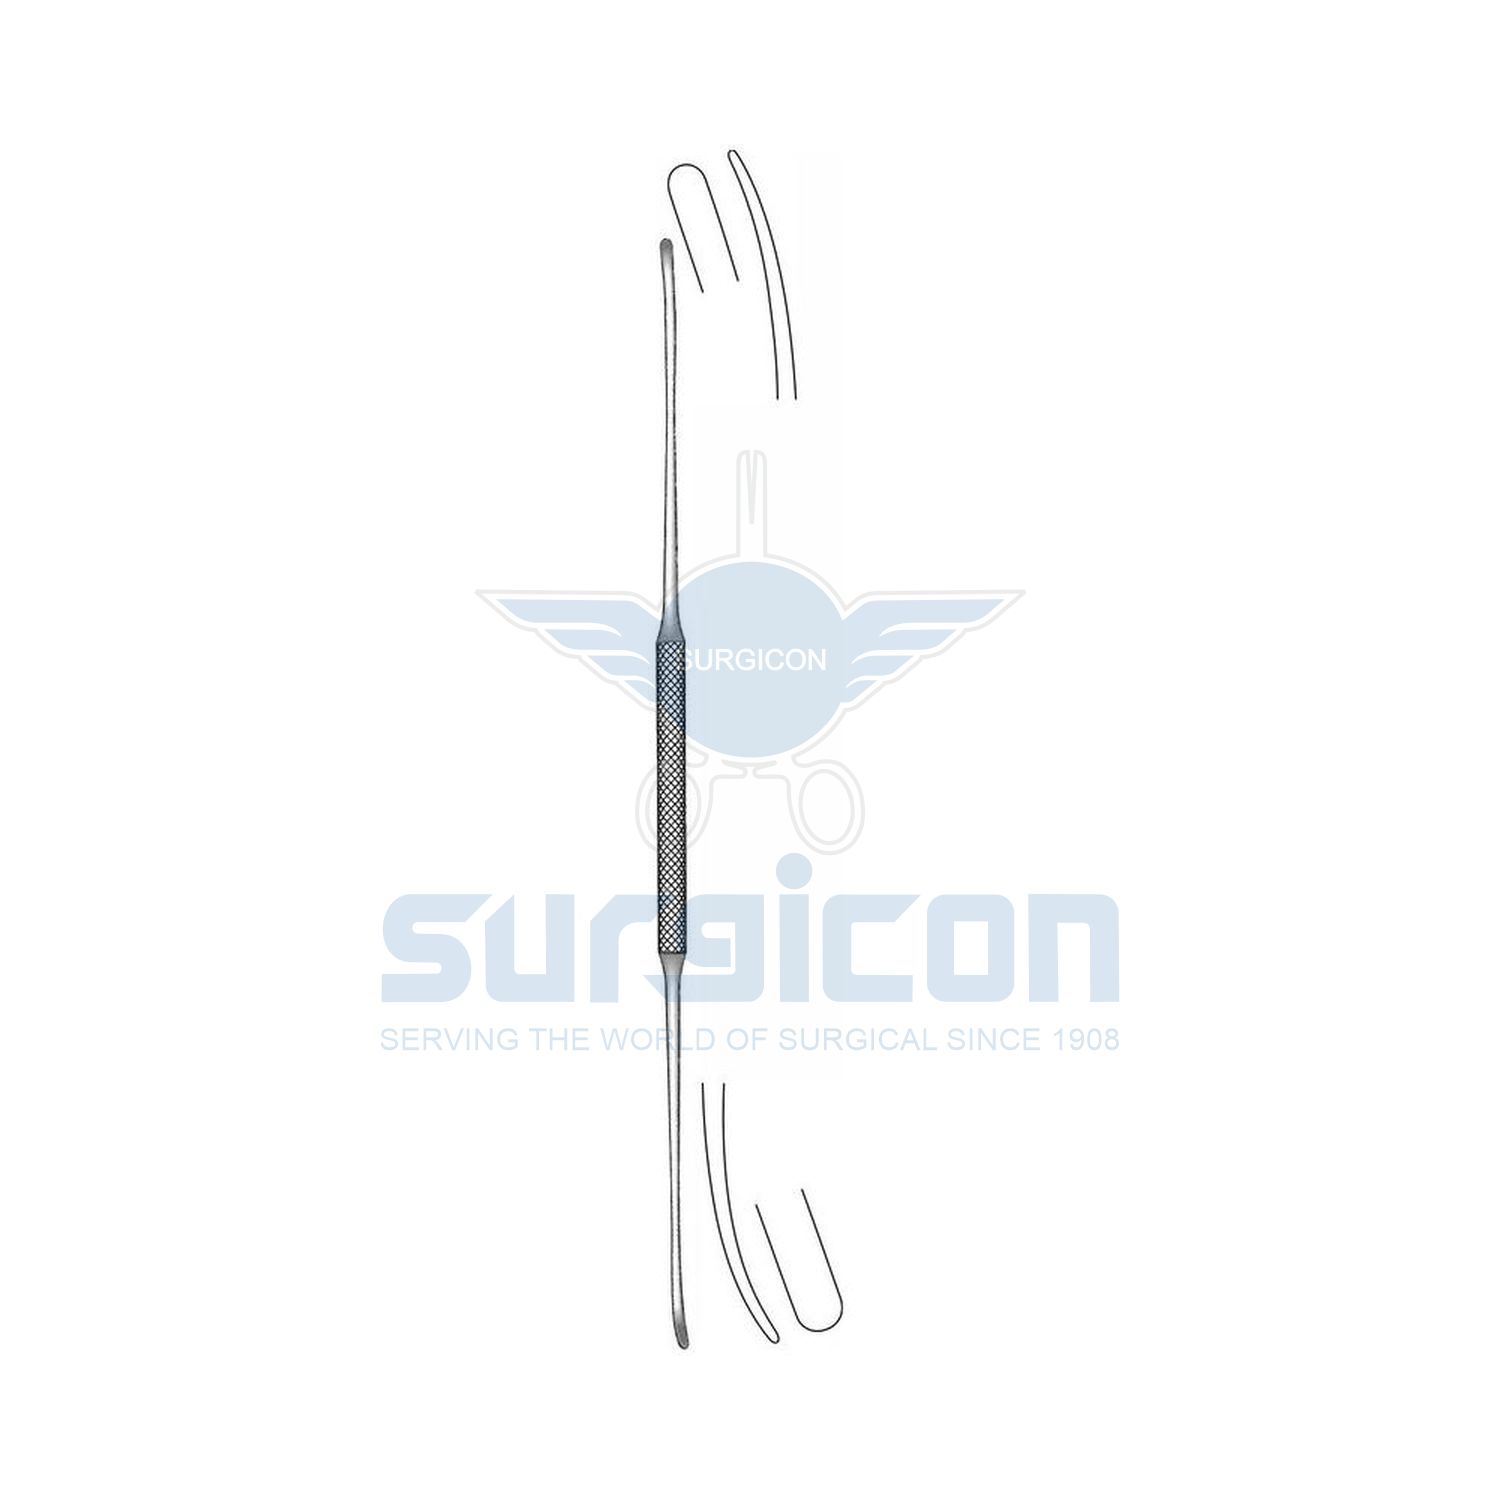 Olivecrona-Dissector-J-25-394